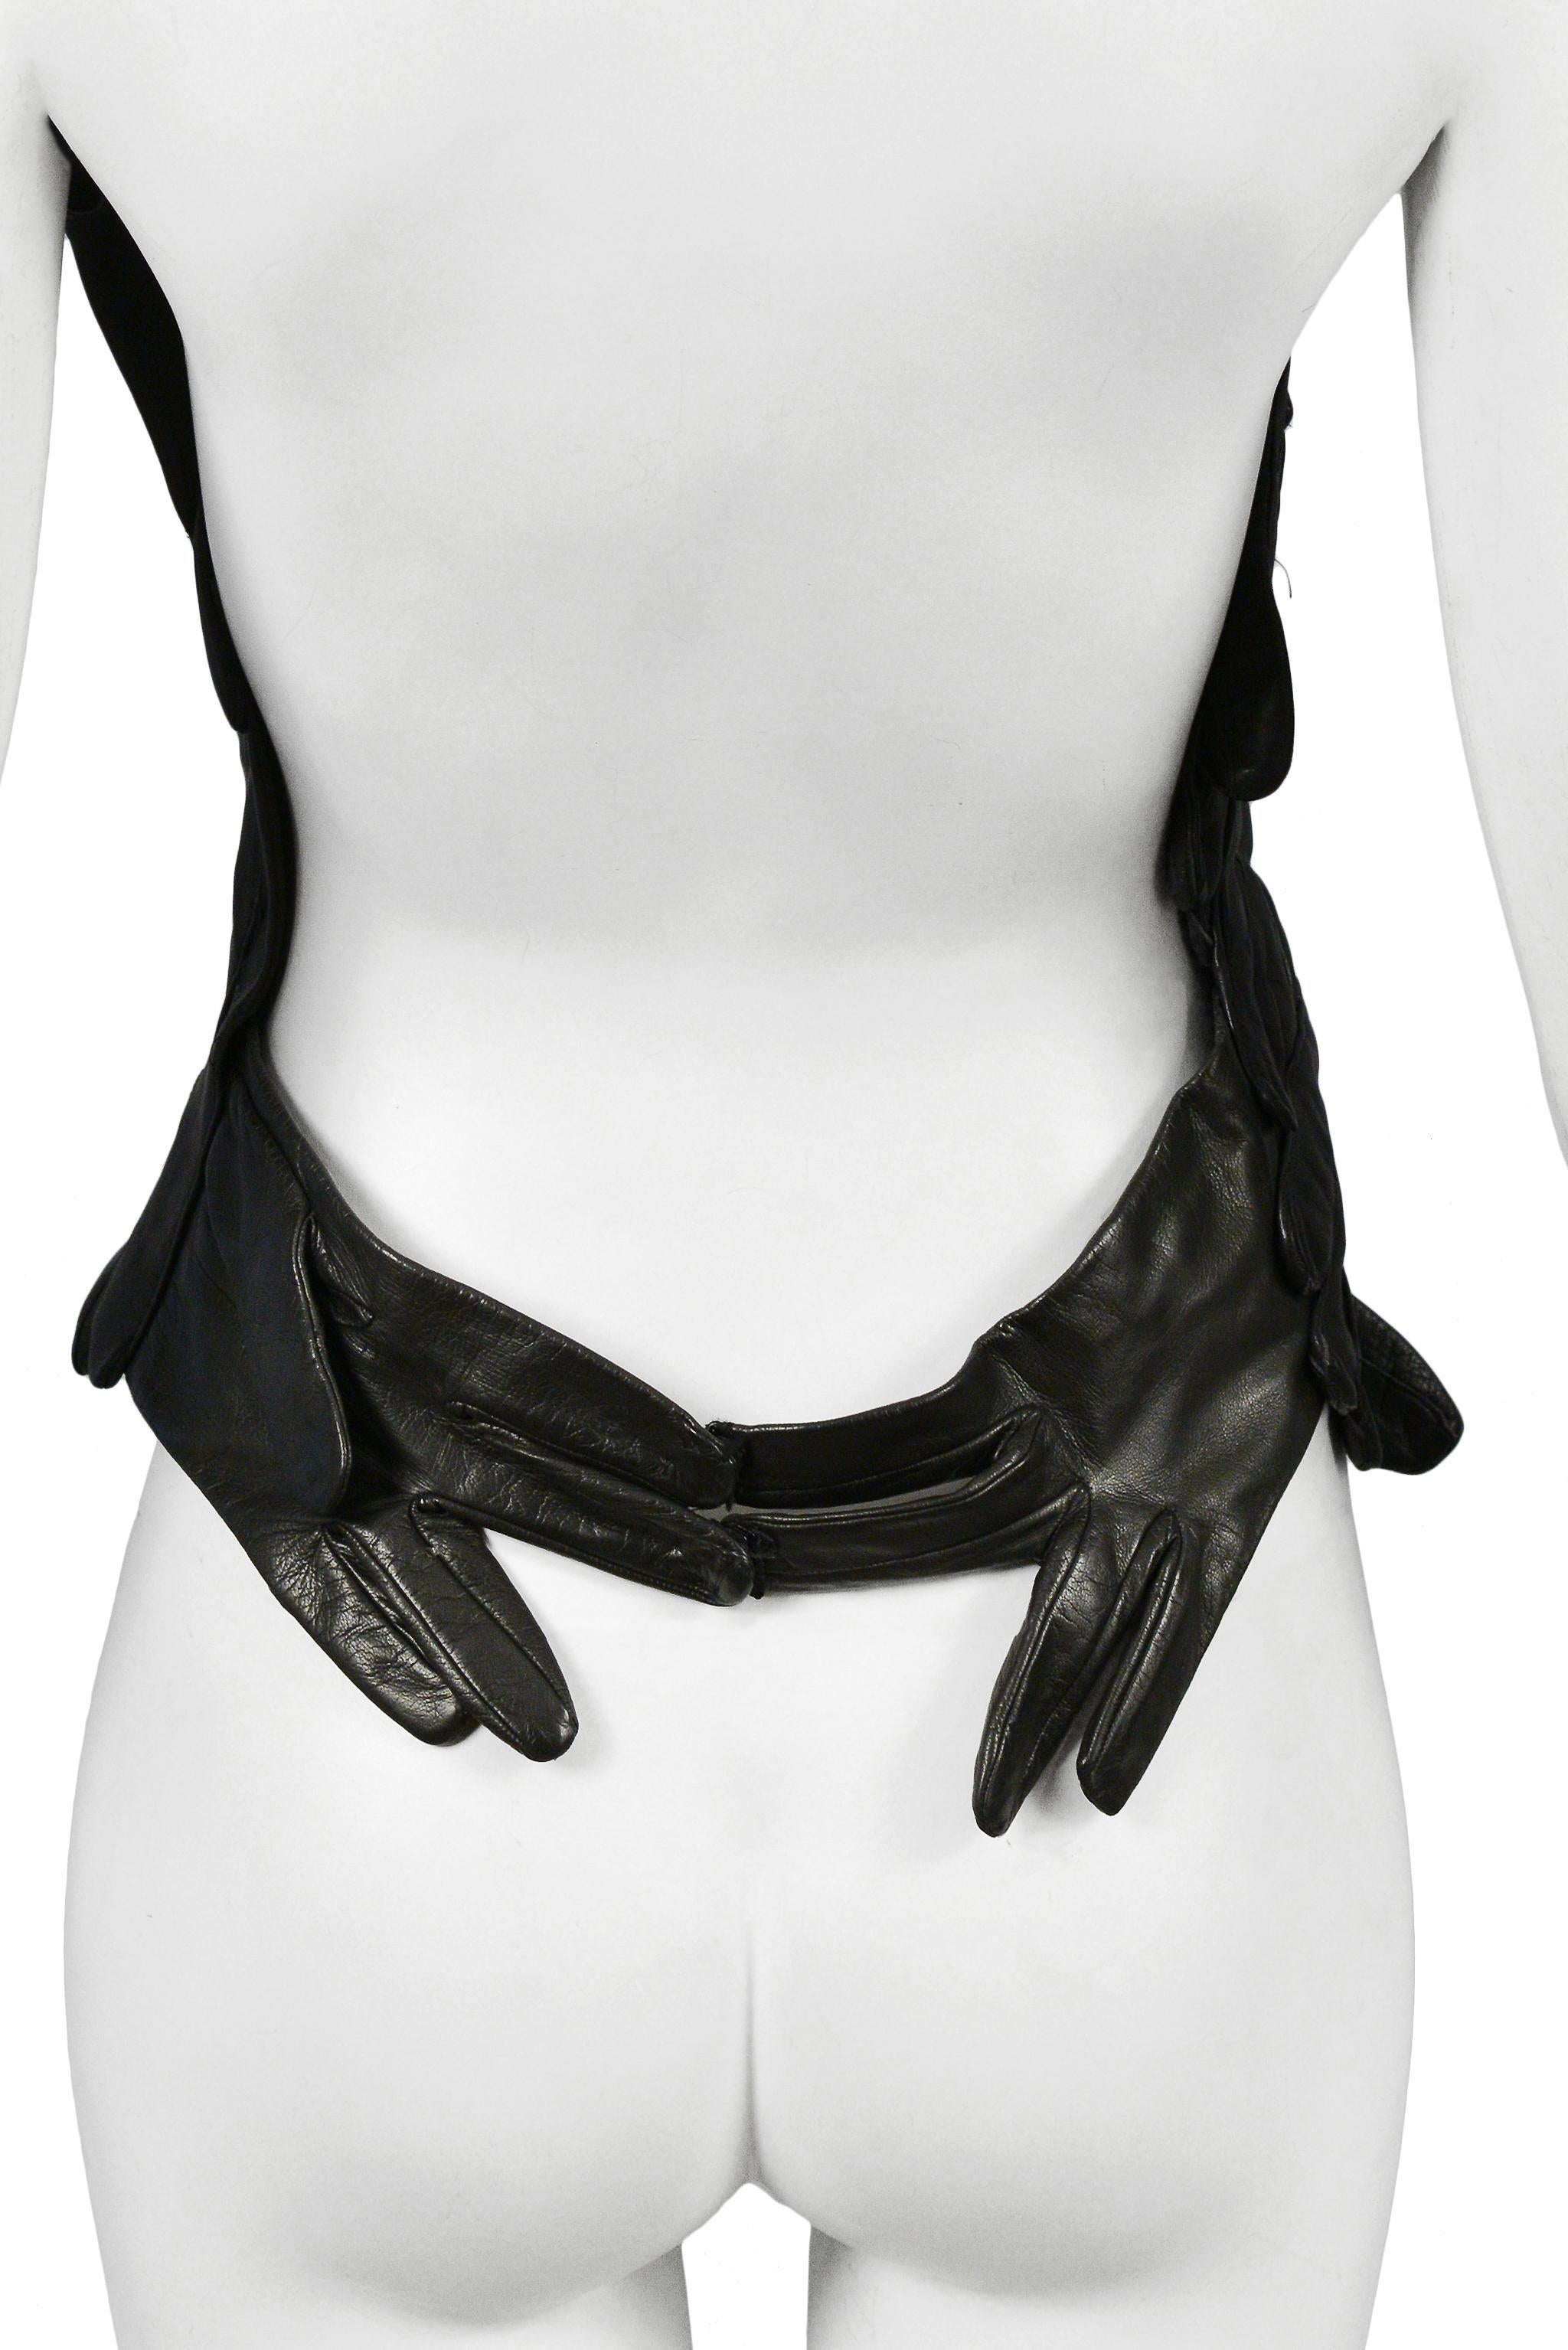 Vintage Maison Martin Margiela Artisanal Black Leather Glove Top 2001 In Excellent Condition For Sale In Los Angeles, CA